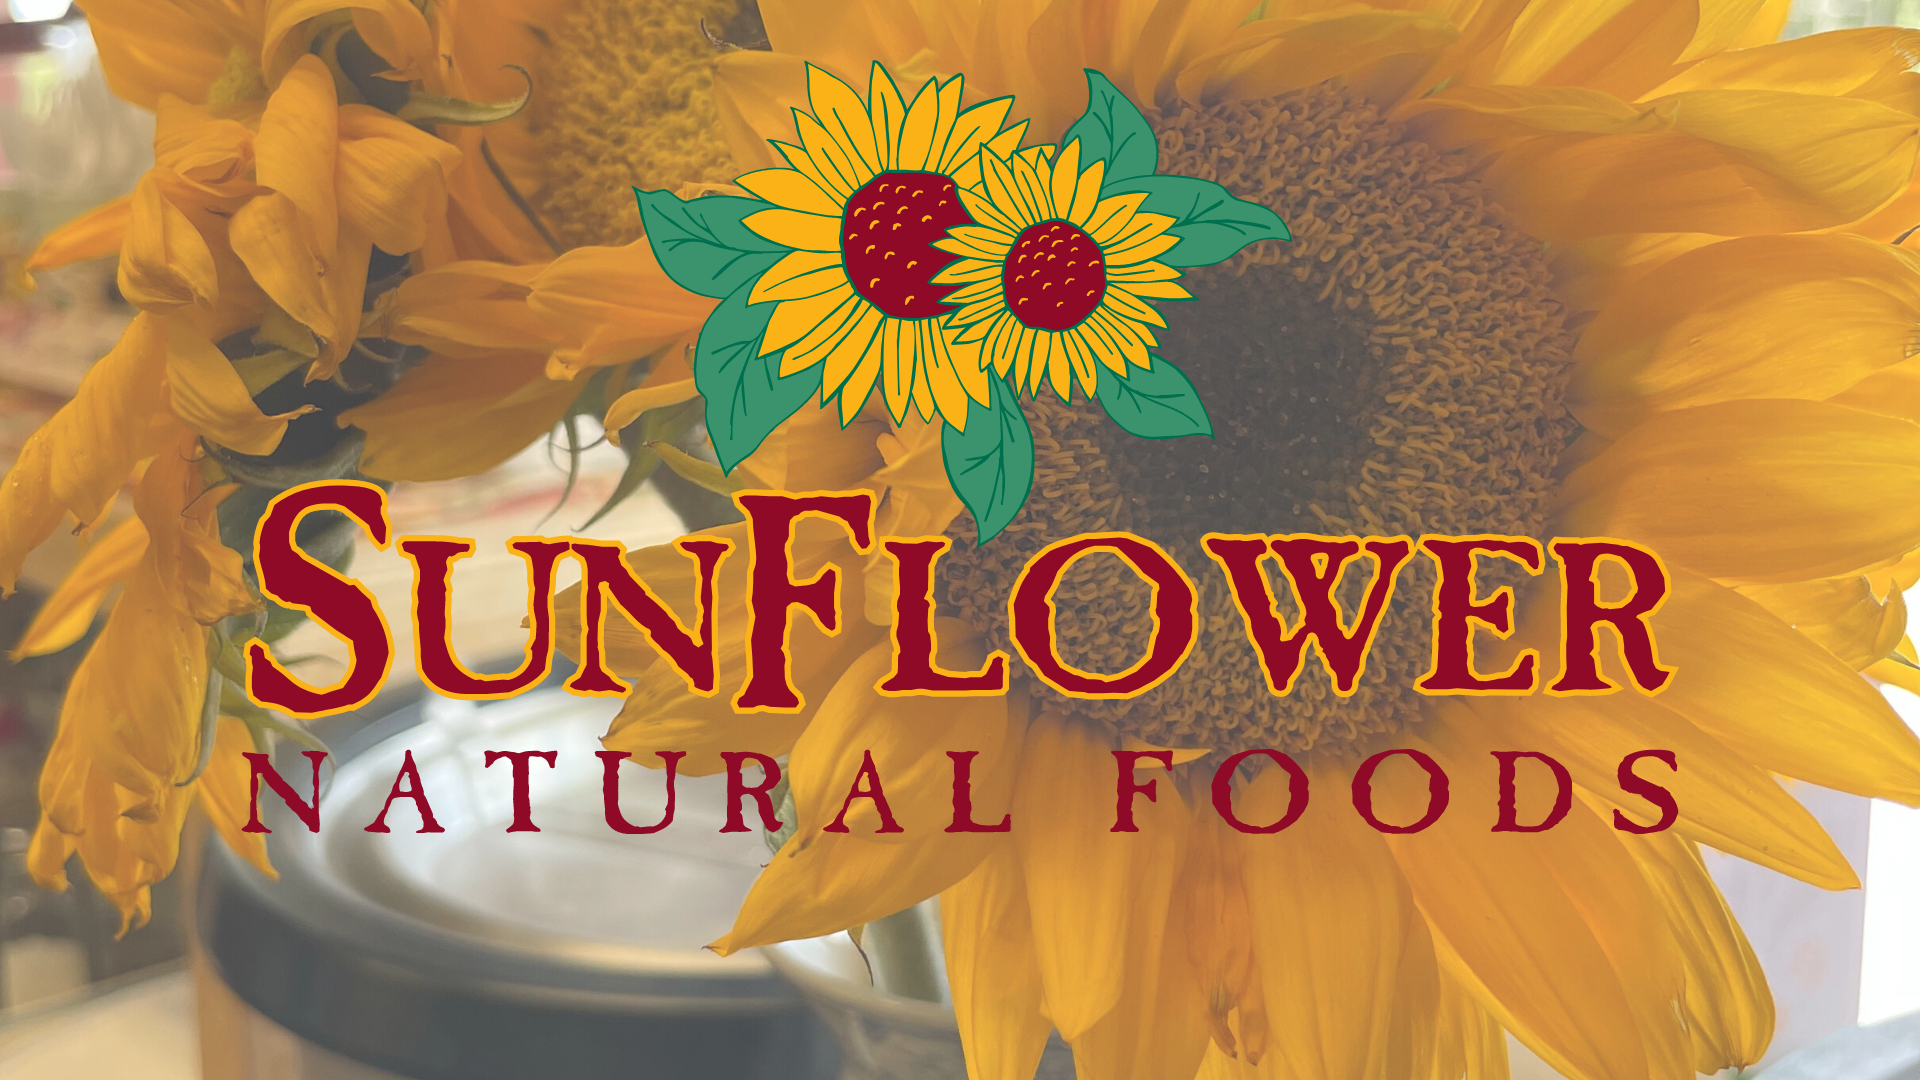 Sunflower Natural Foods Icon on top of a photo of sunflowers